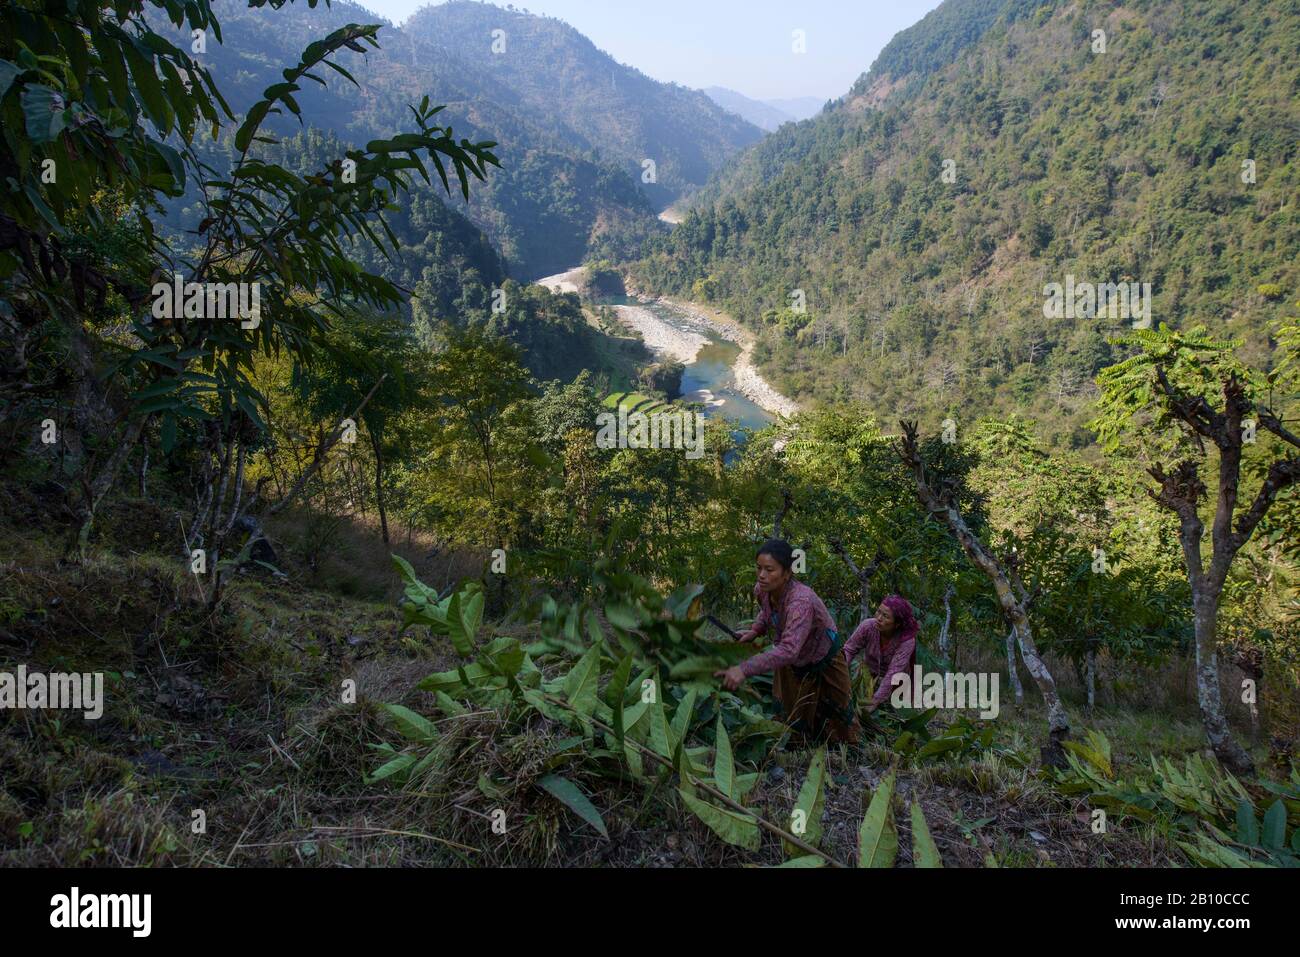 Village women collect tree leaves in the Anterior Himalayas, Nepal Stock Photo